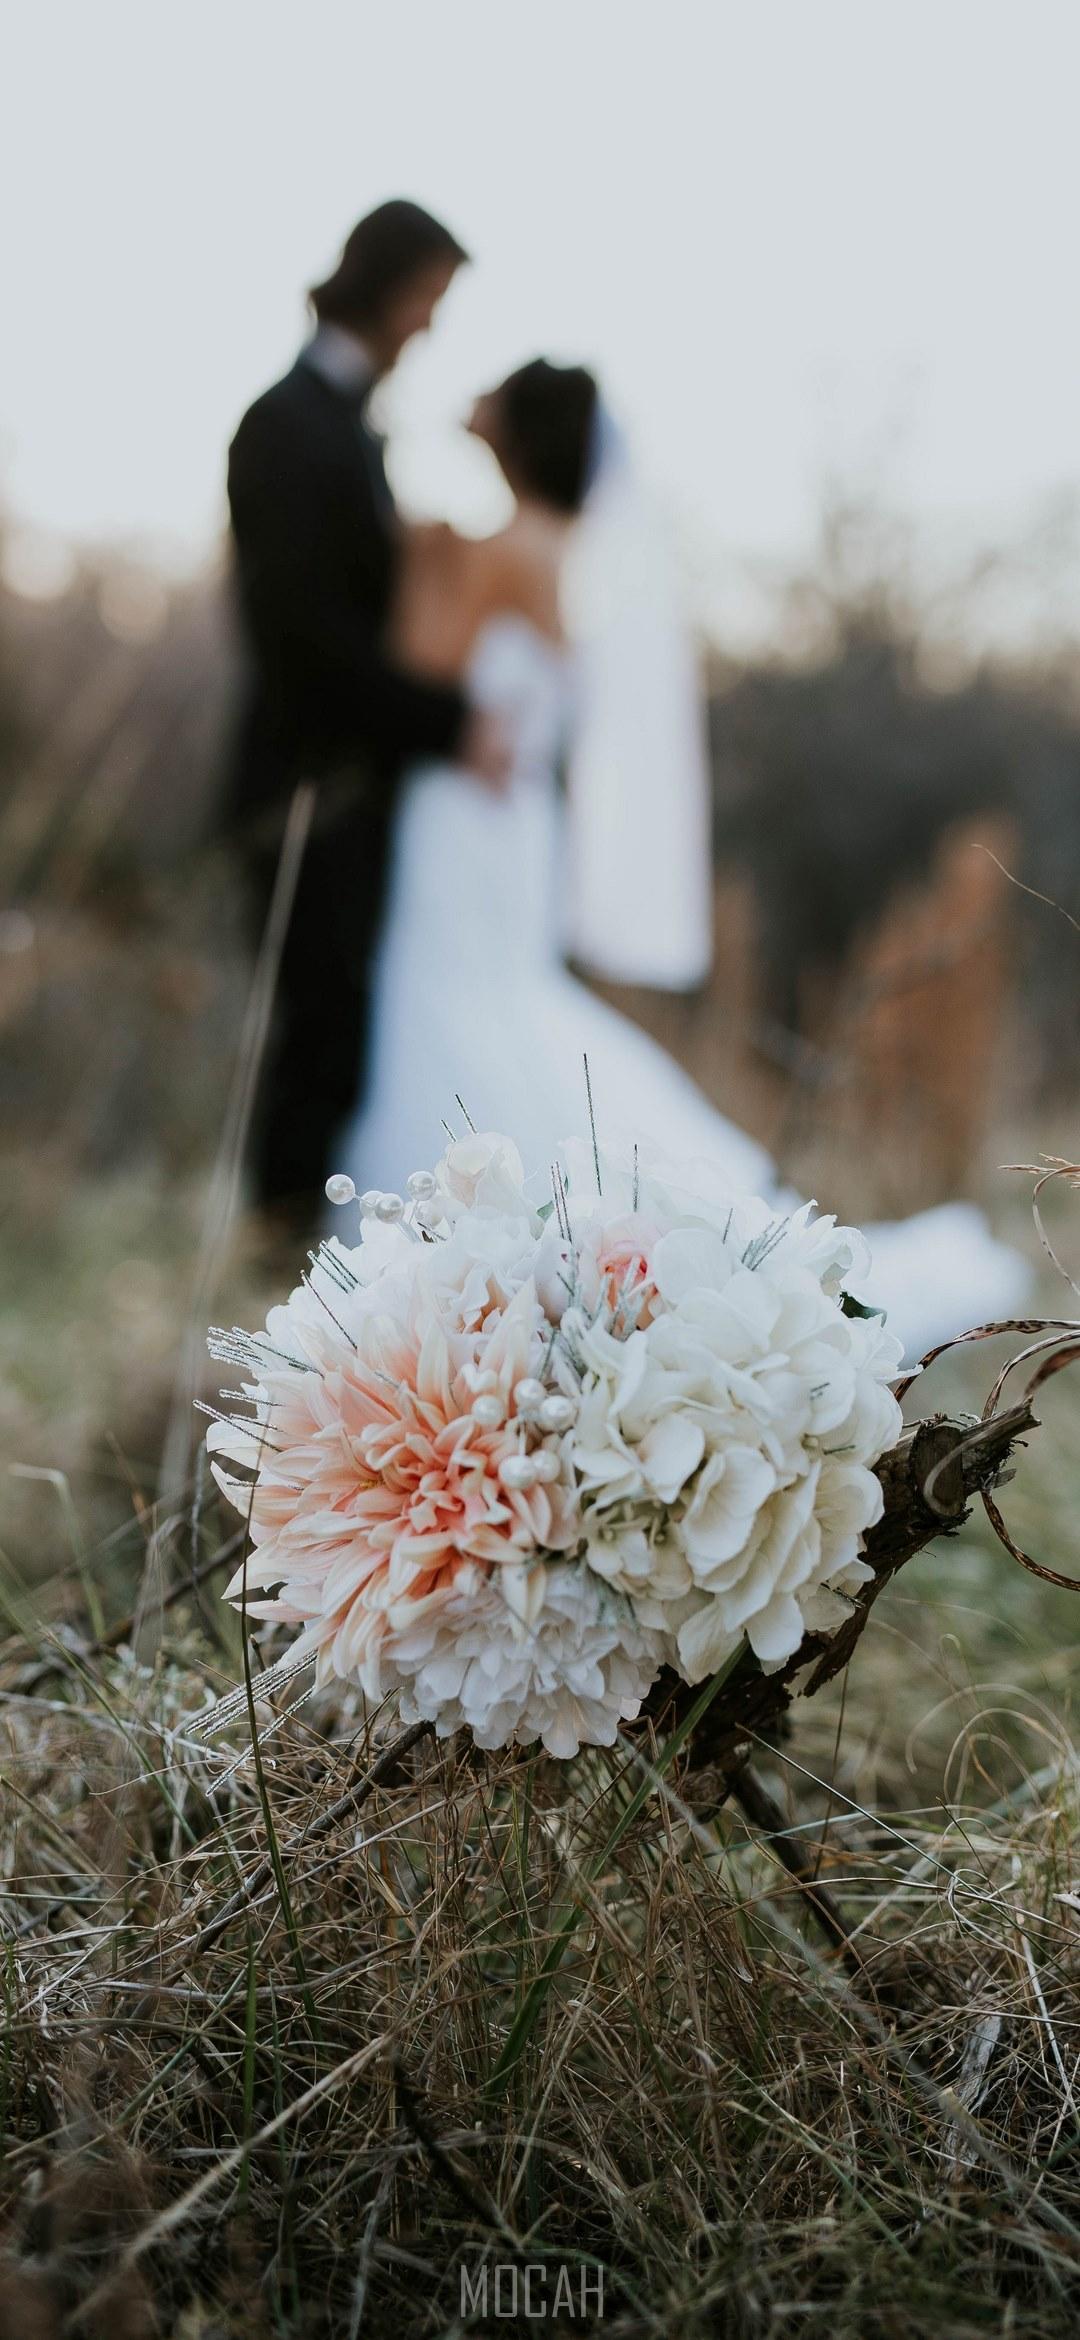 HD wallpaper, Wedding Evening, 1080X2340, A Bouquet Sits In Tall Grass While A Married Couple Embraces In The Fuzzy Background, Lenovo Legion Duel Wallpaper 1080P